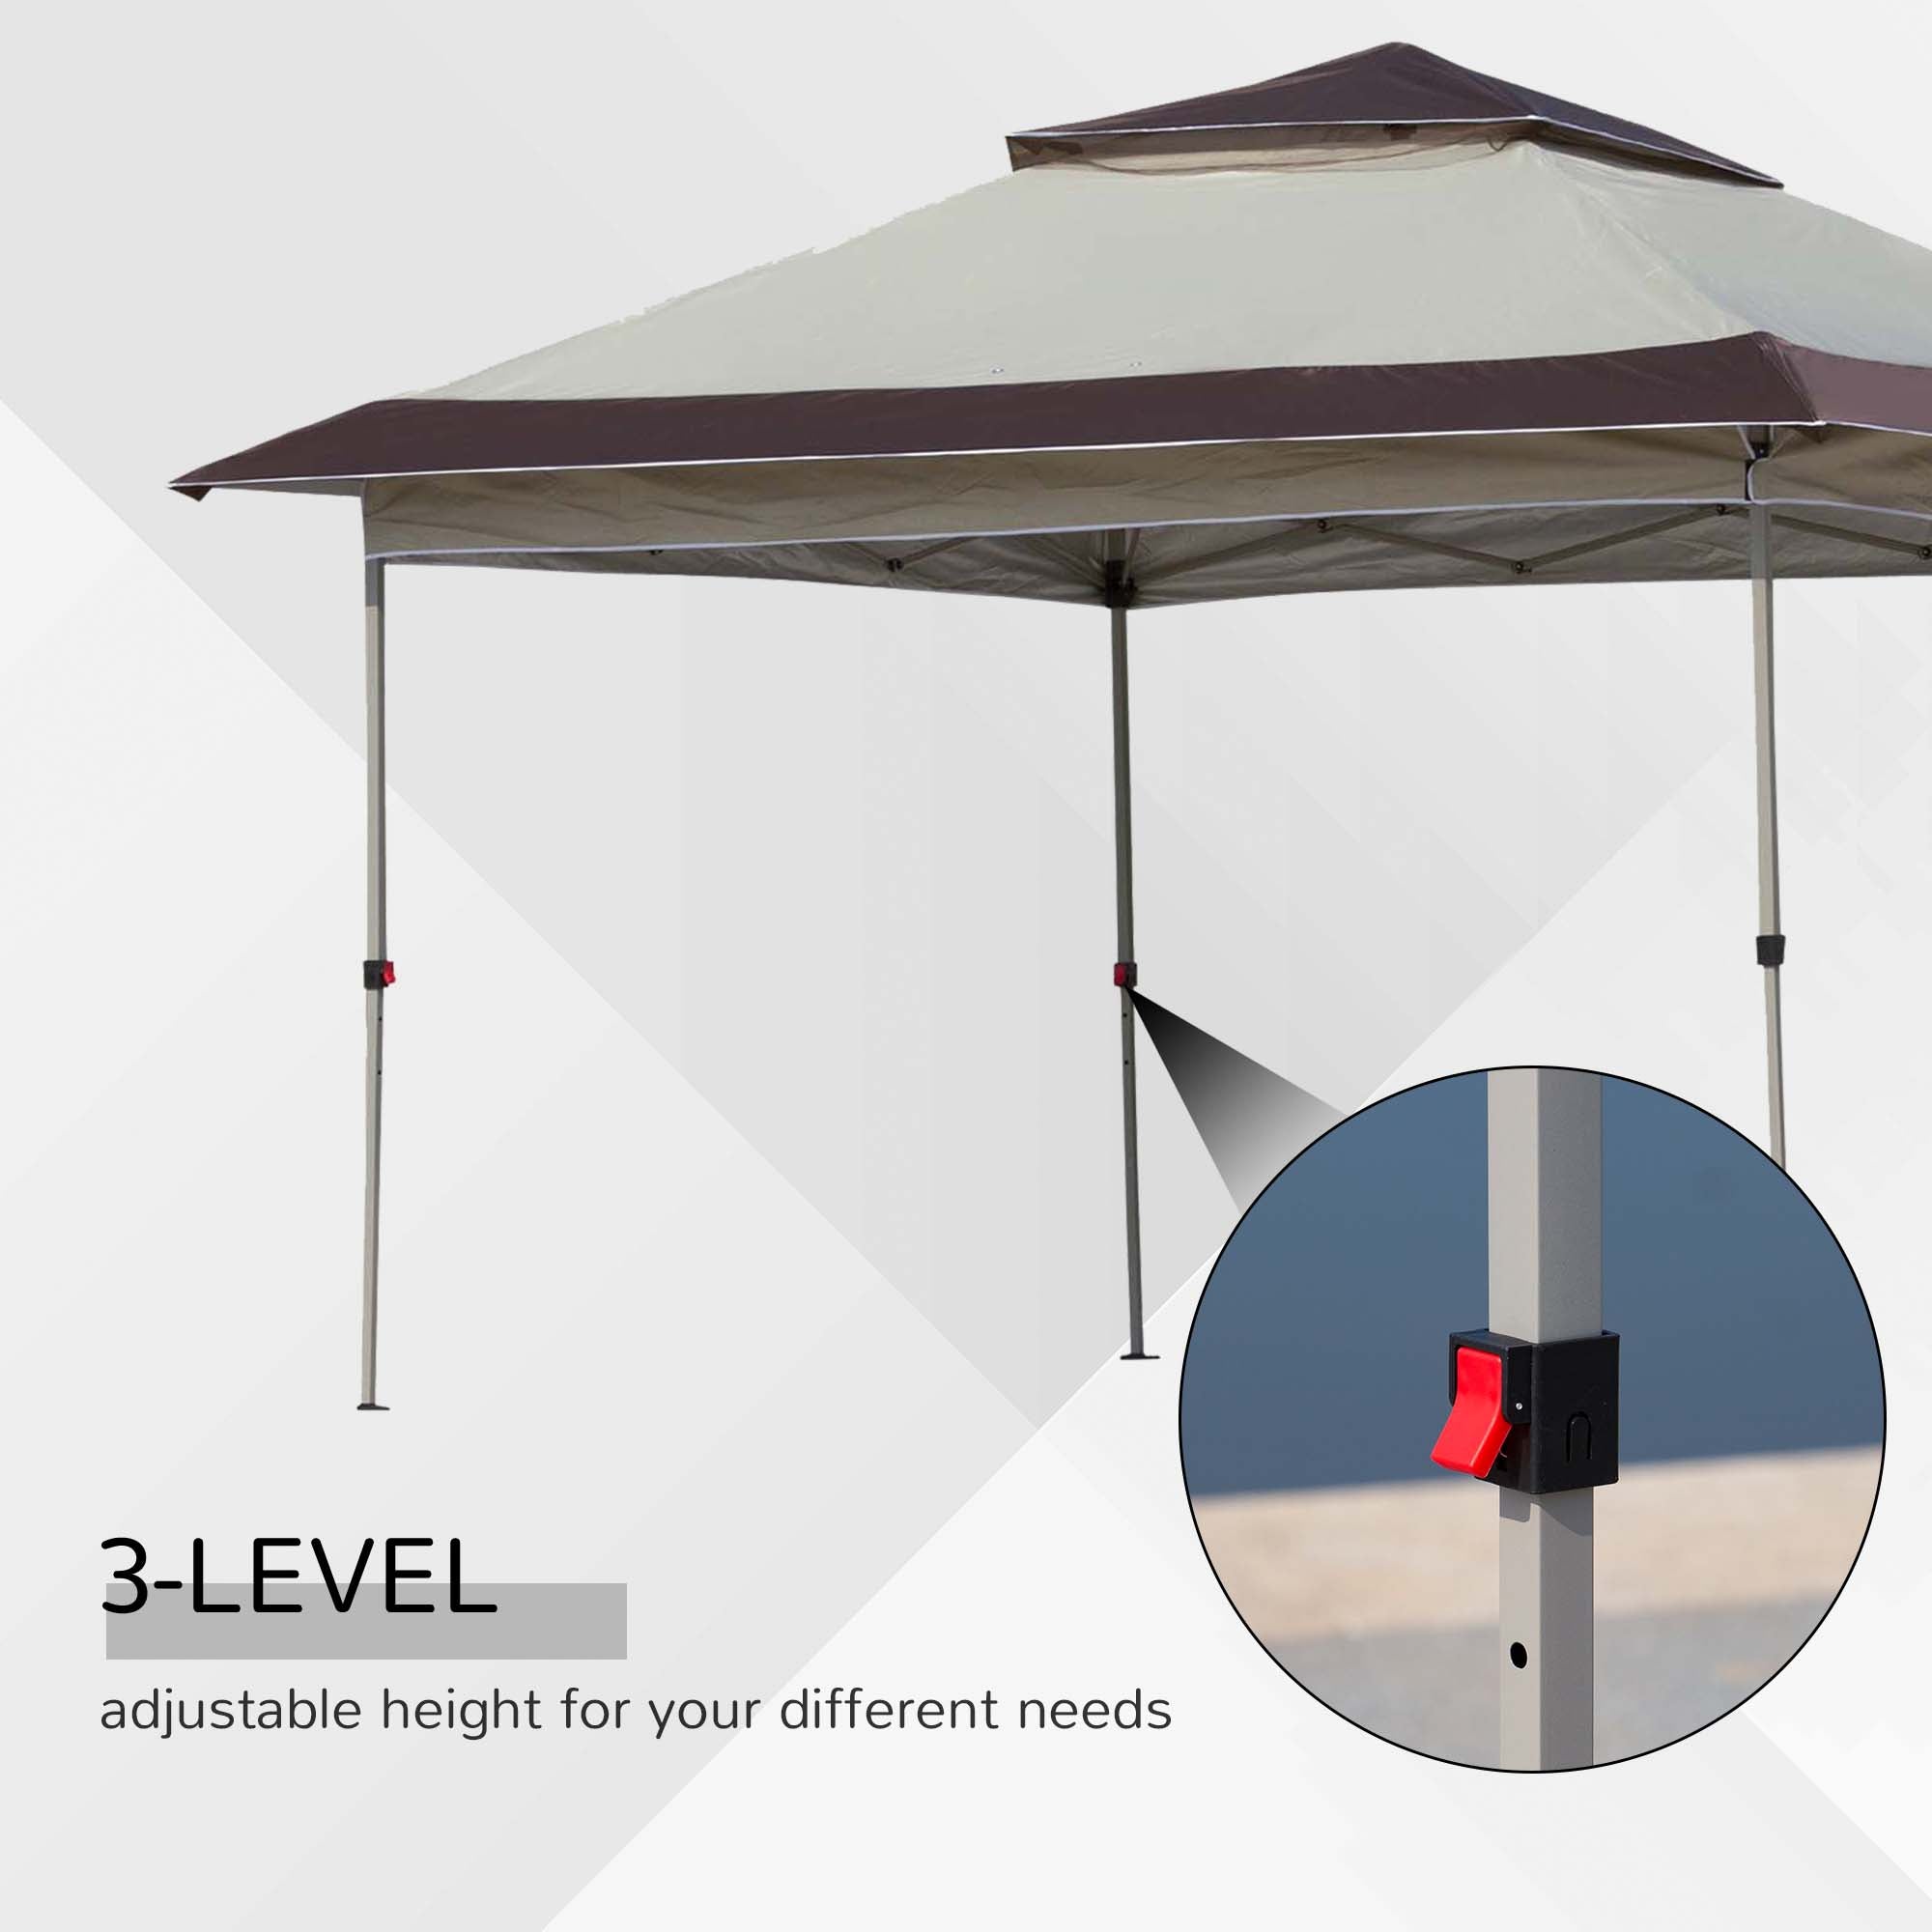 Outsunny 12' x 12' Pop Up Canopy Tent with Netting and Carry Bag, Instant Sun Shelter, Tents for Parties, Height Adjustable, for Outdoor, Garden, Patio, Beige